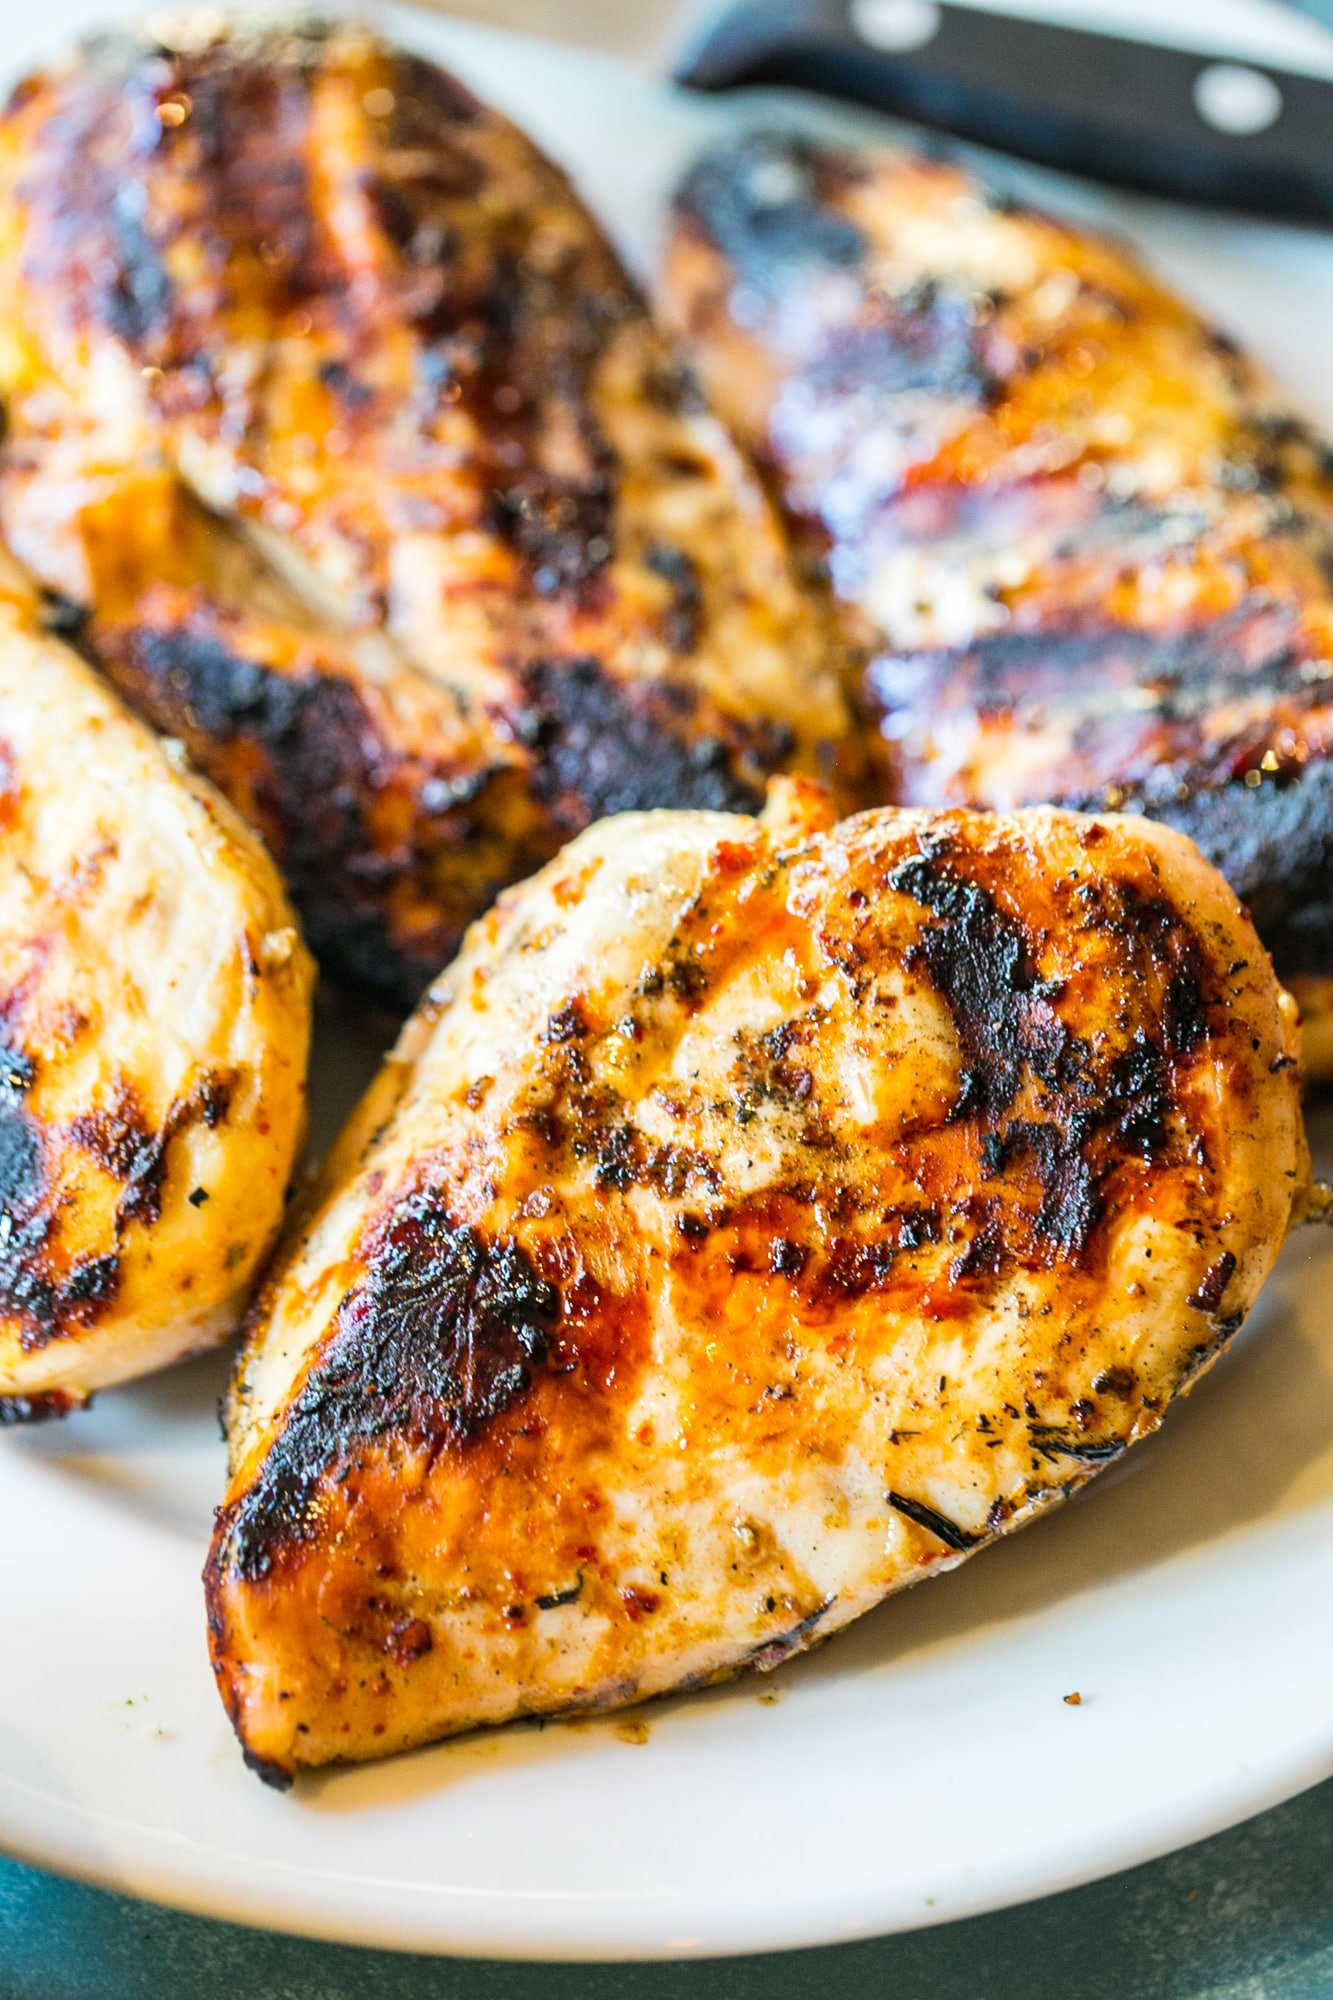 15 Healthy Recipes for Grilled Chicken Breasts